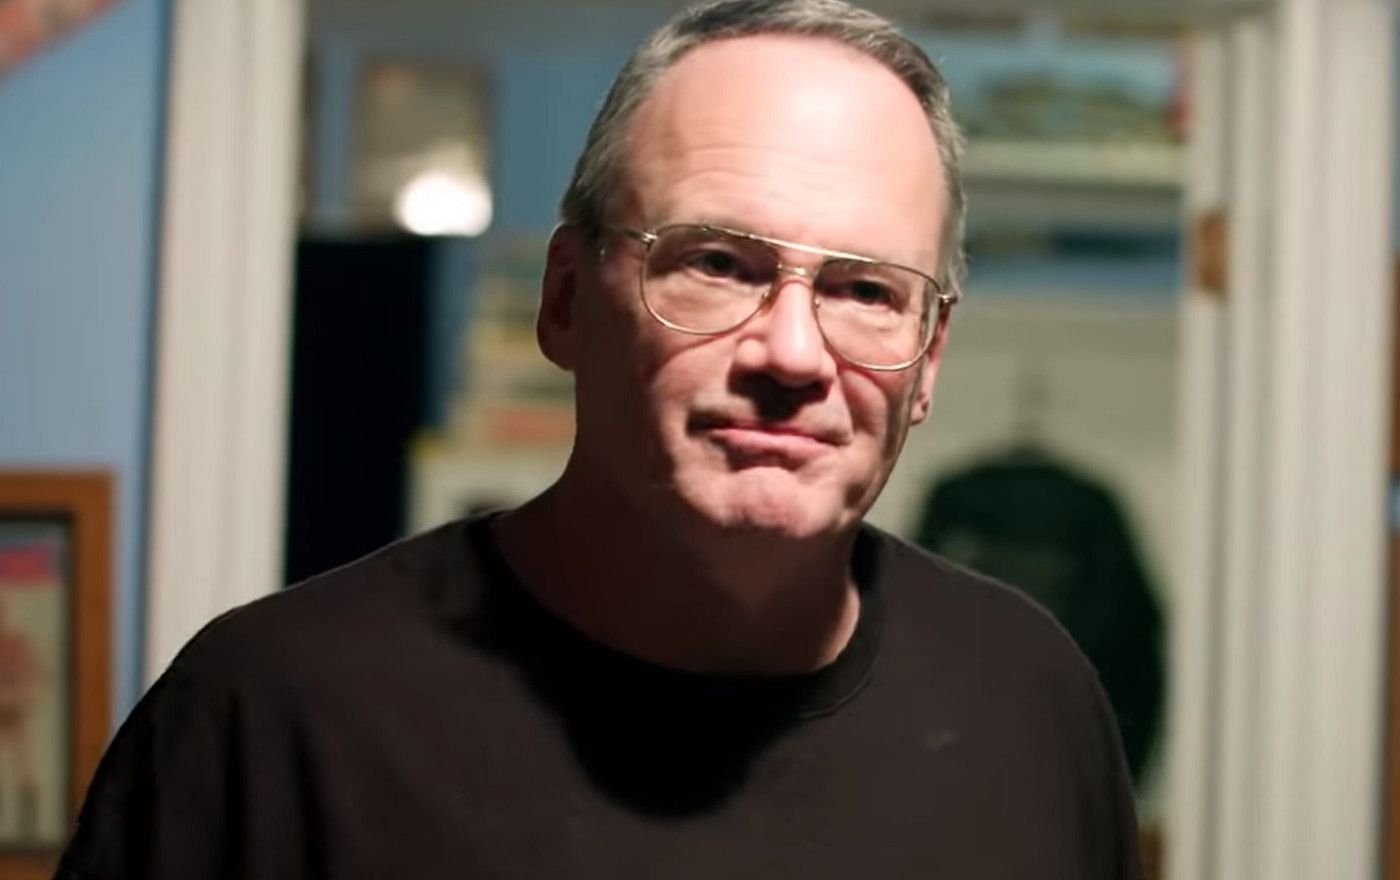 Jim Cornette revealed his opinion on a former WWE star joining AEW